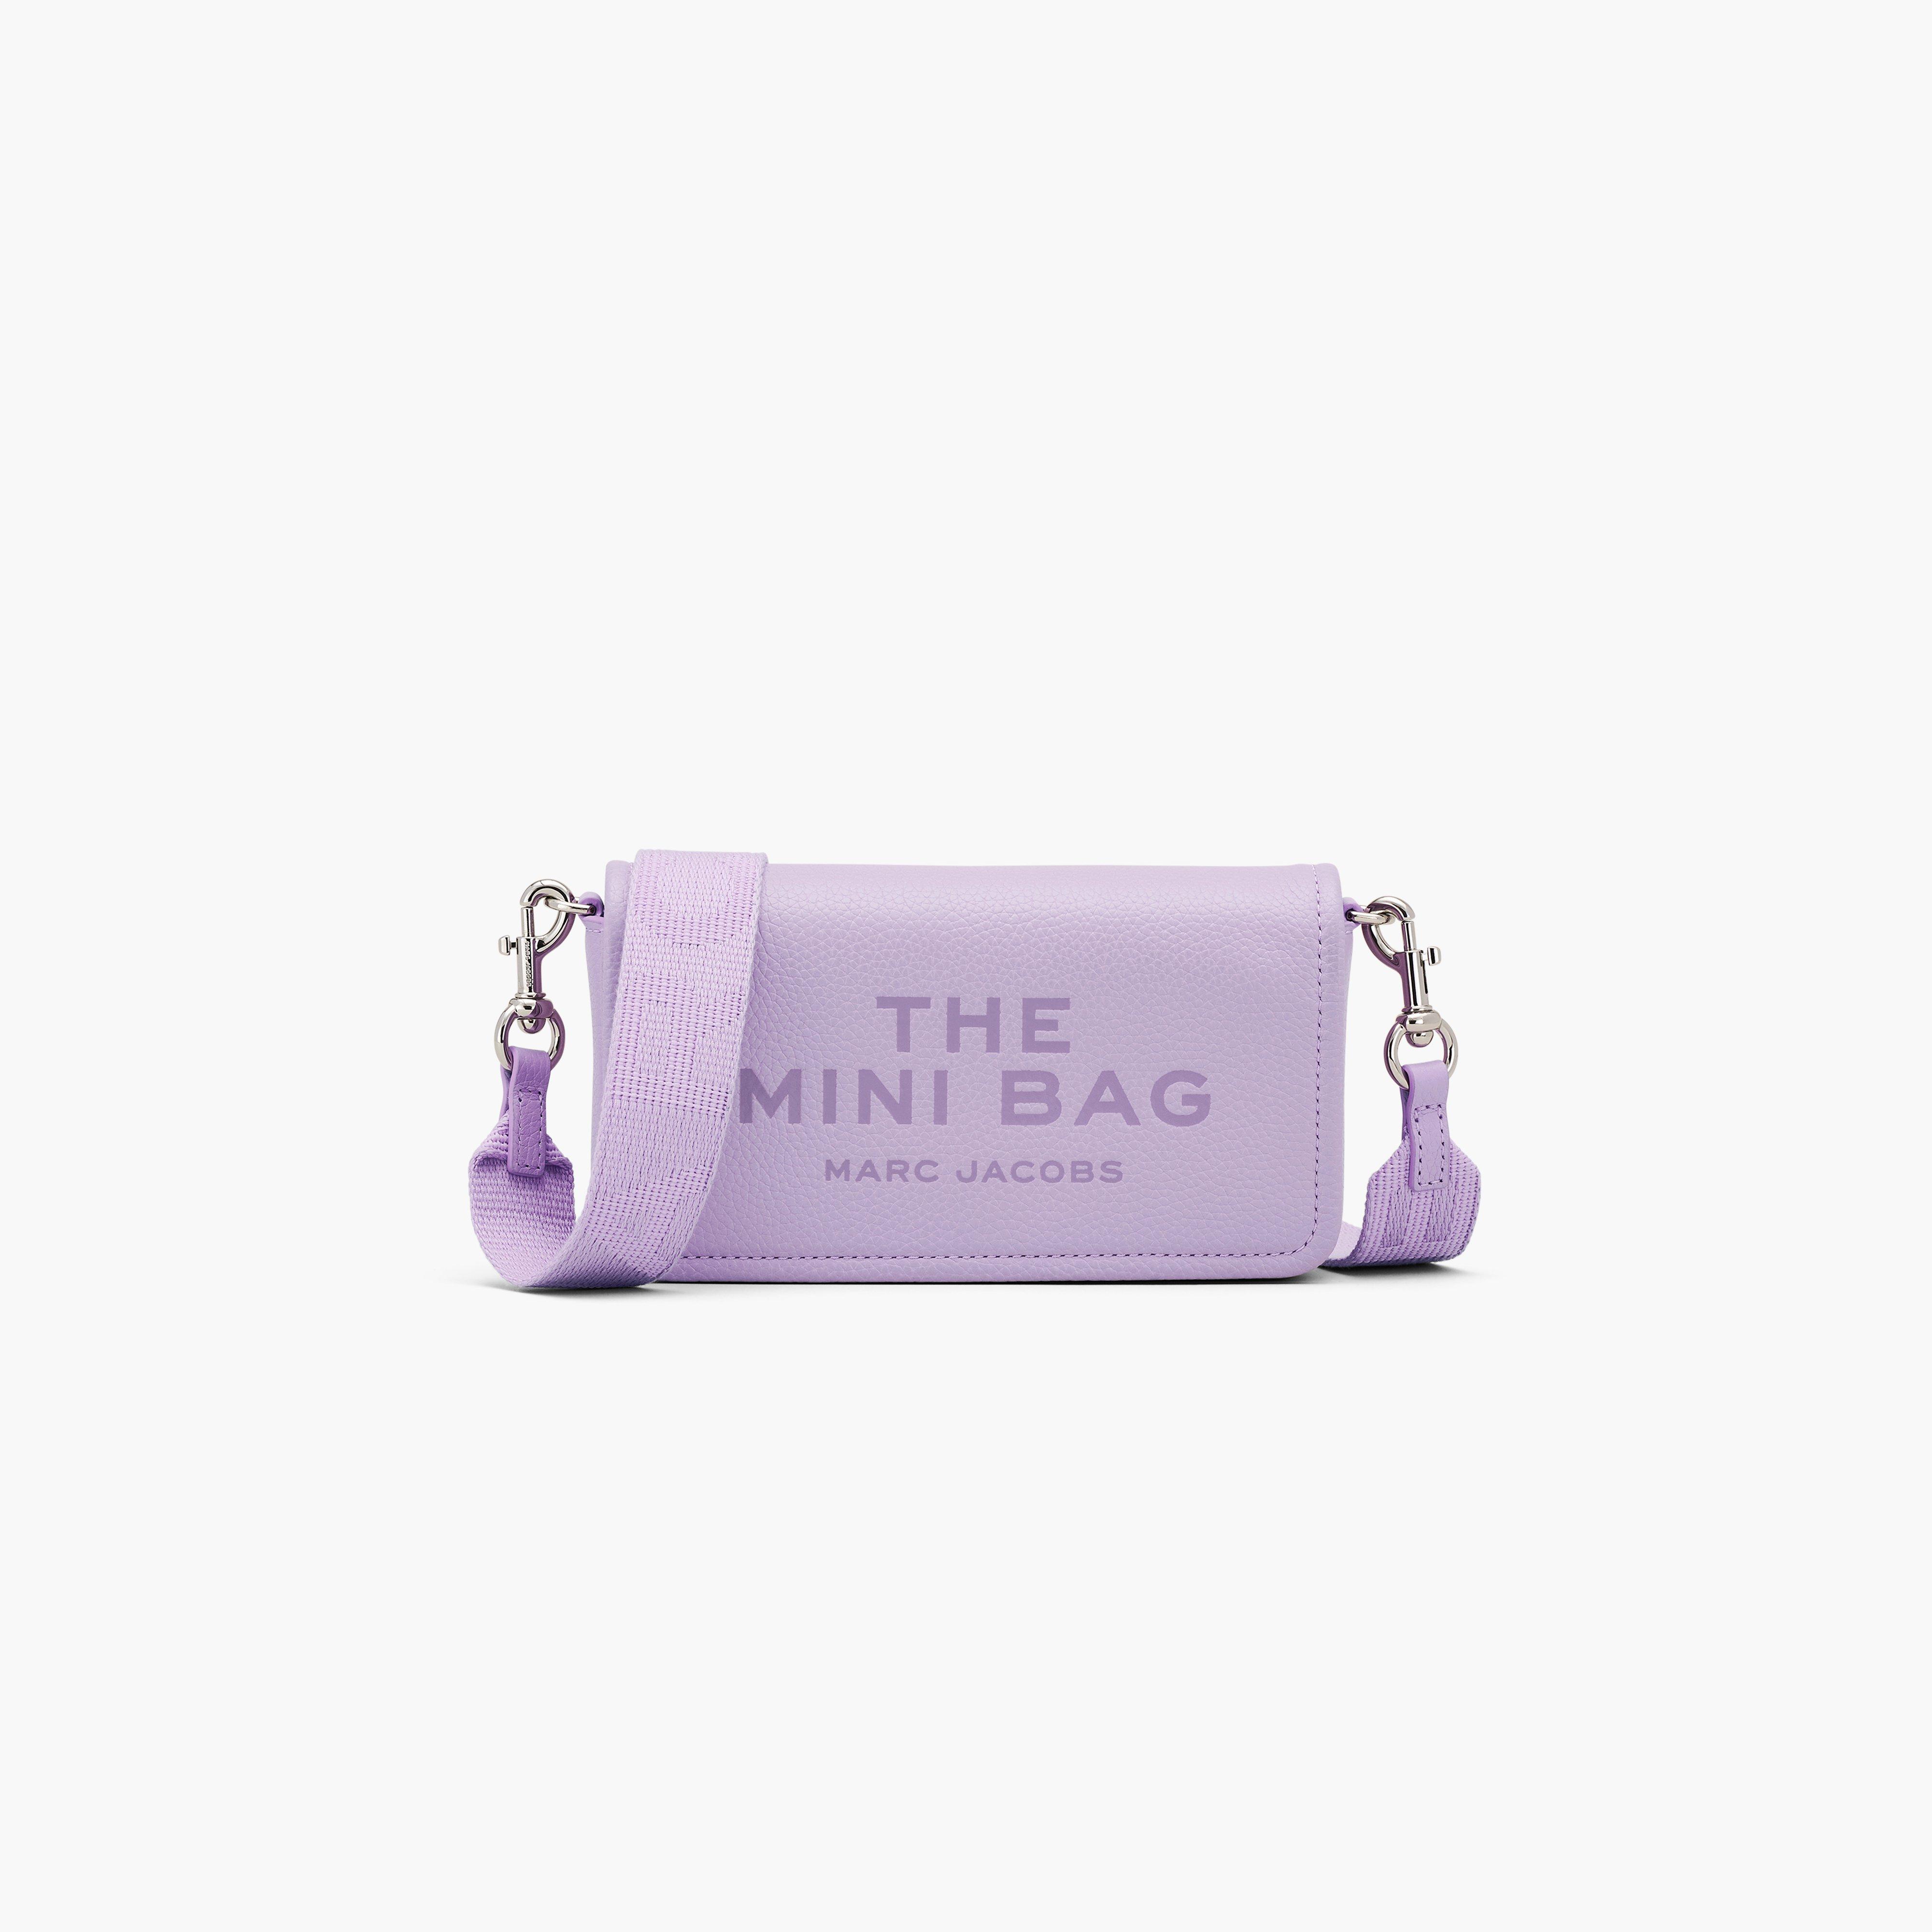 Marc by Marc jacobs The Leather Mini Bag,WISTERIA